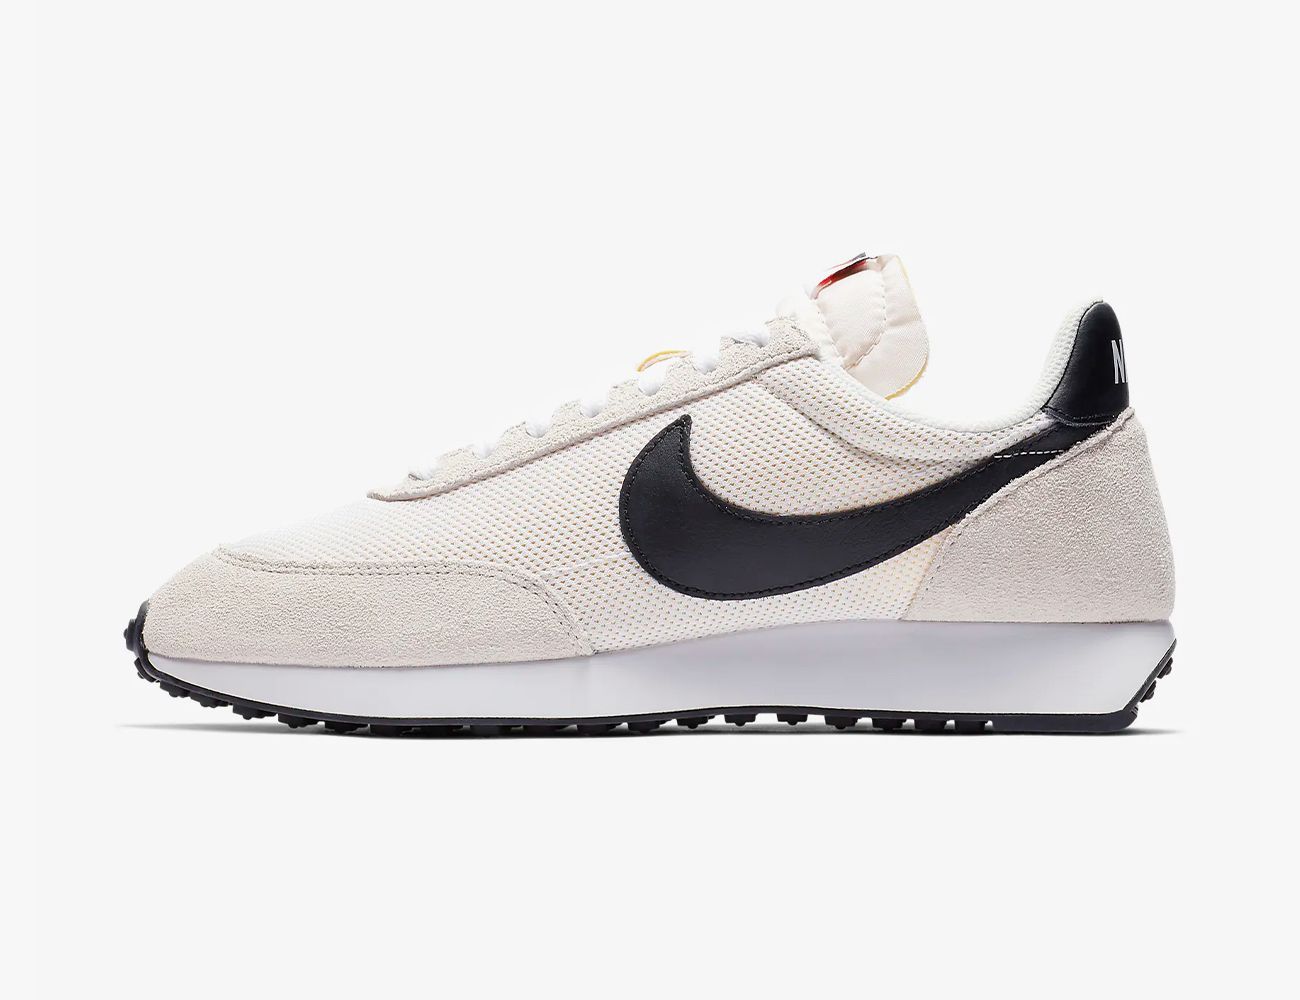 10 Nike Sneakers You Can Buy Now That Capture the of